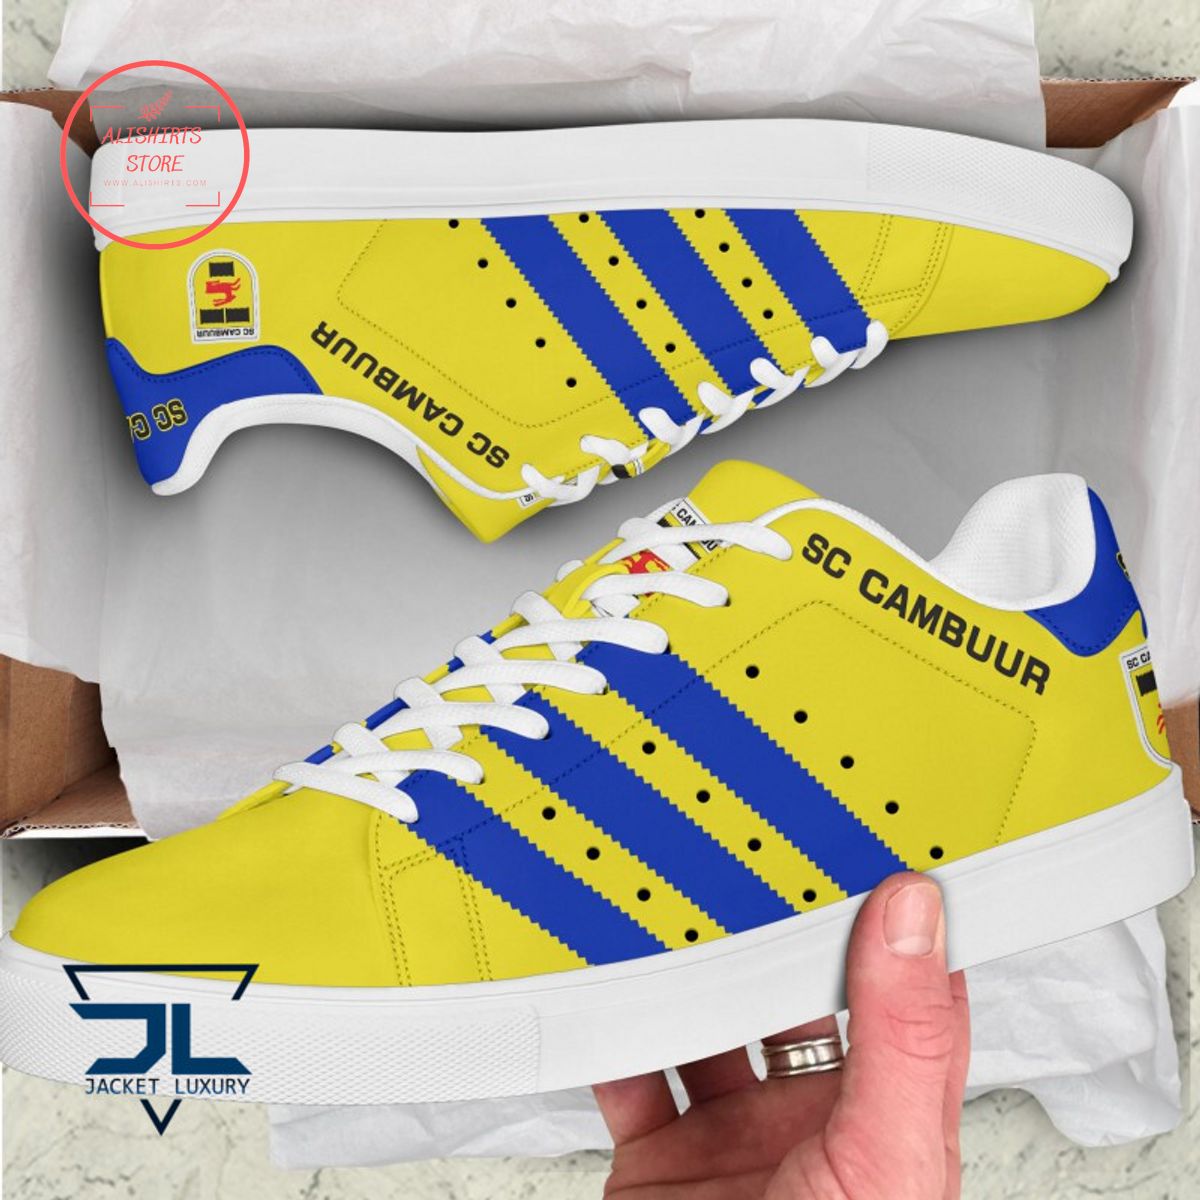 SC Cambuur Stan Smith Shoes